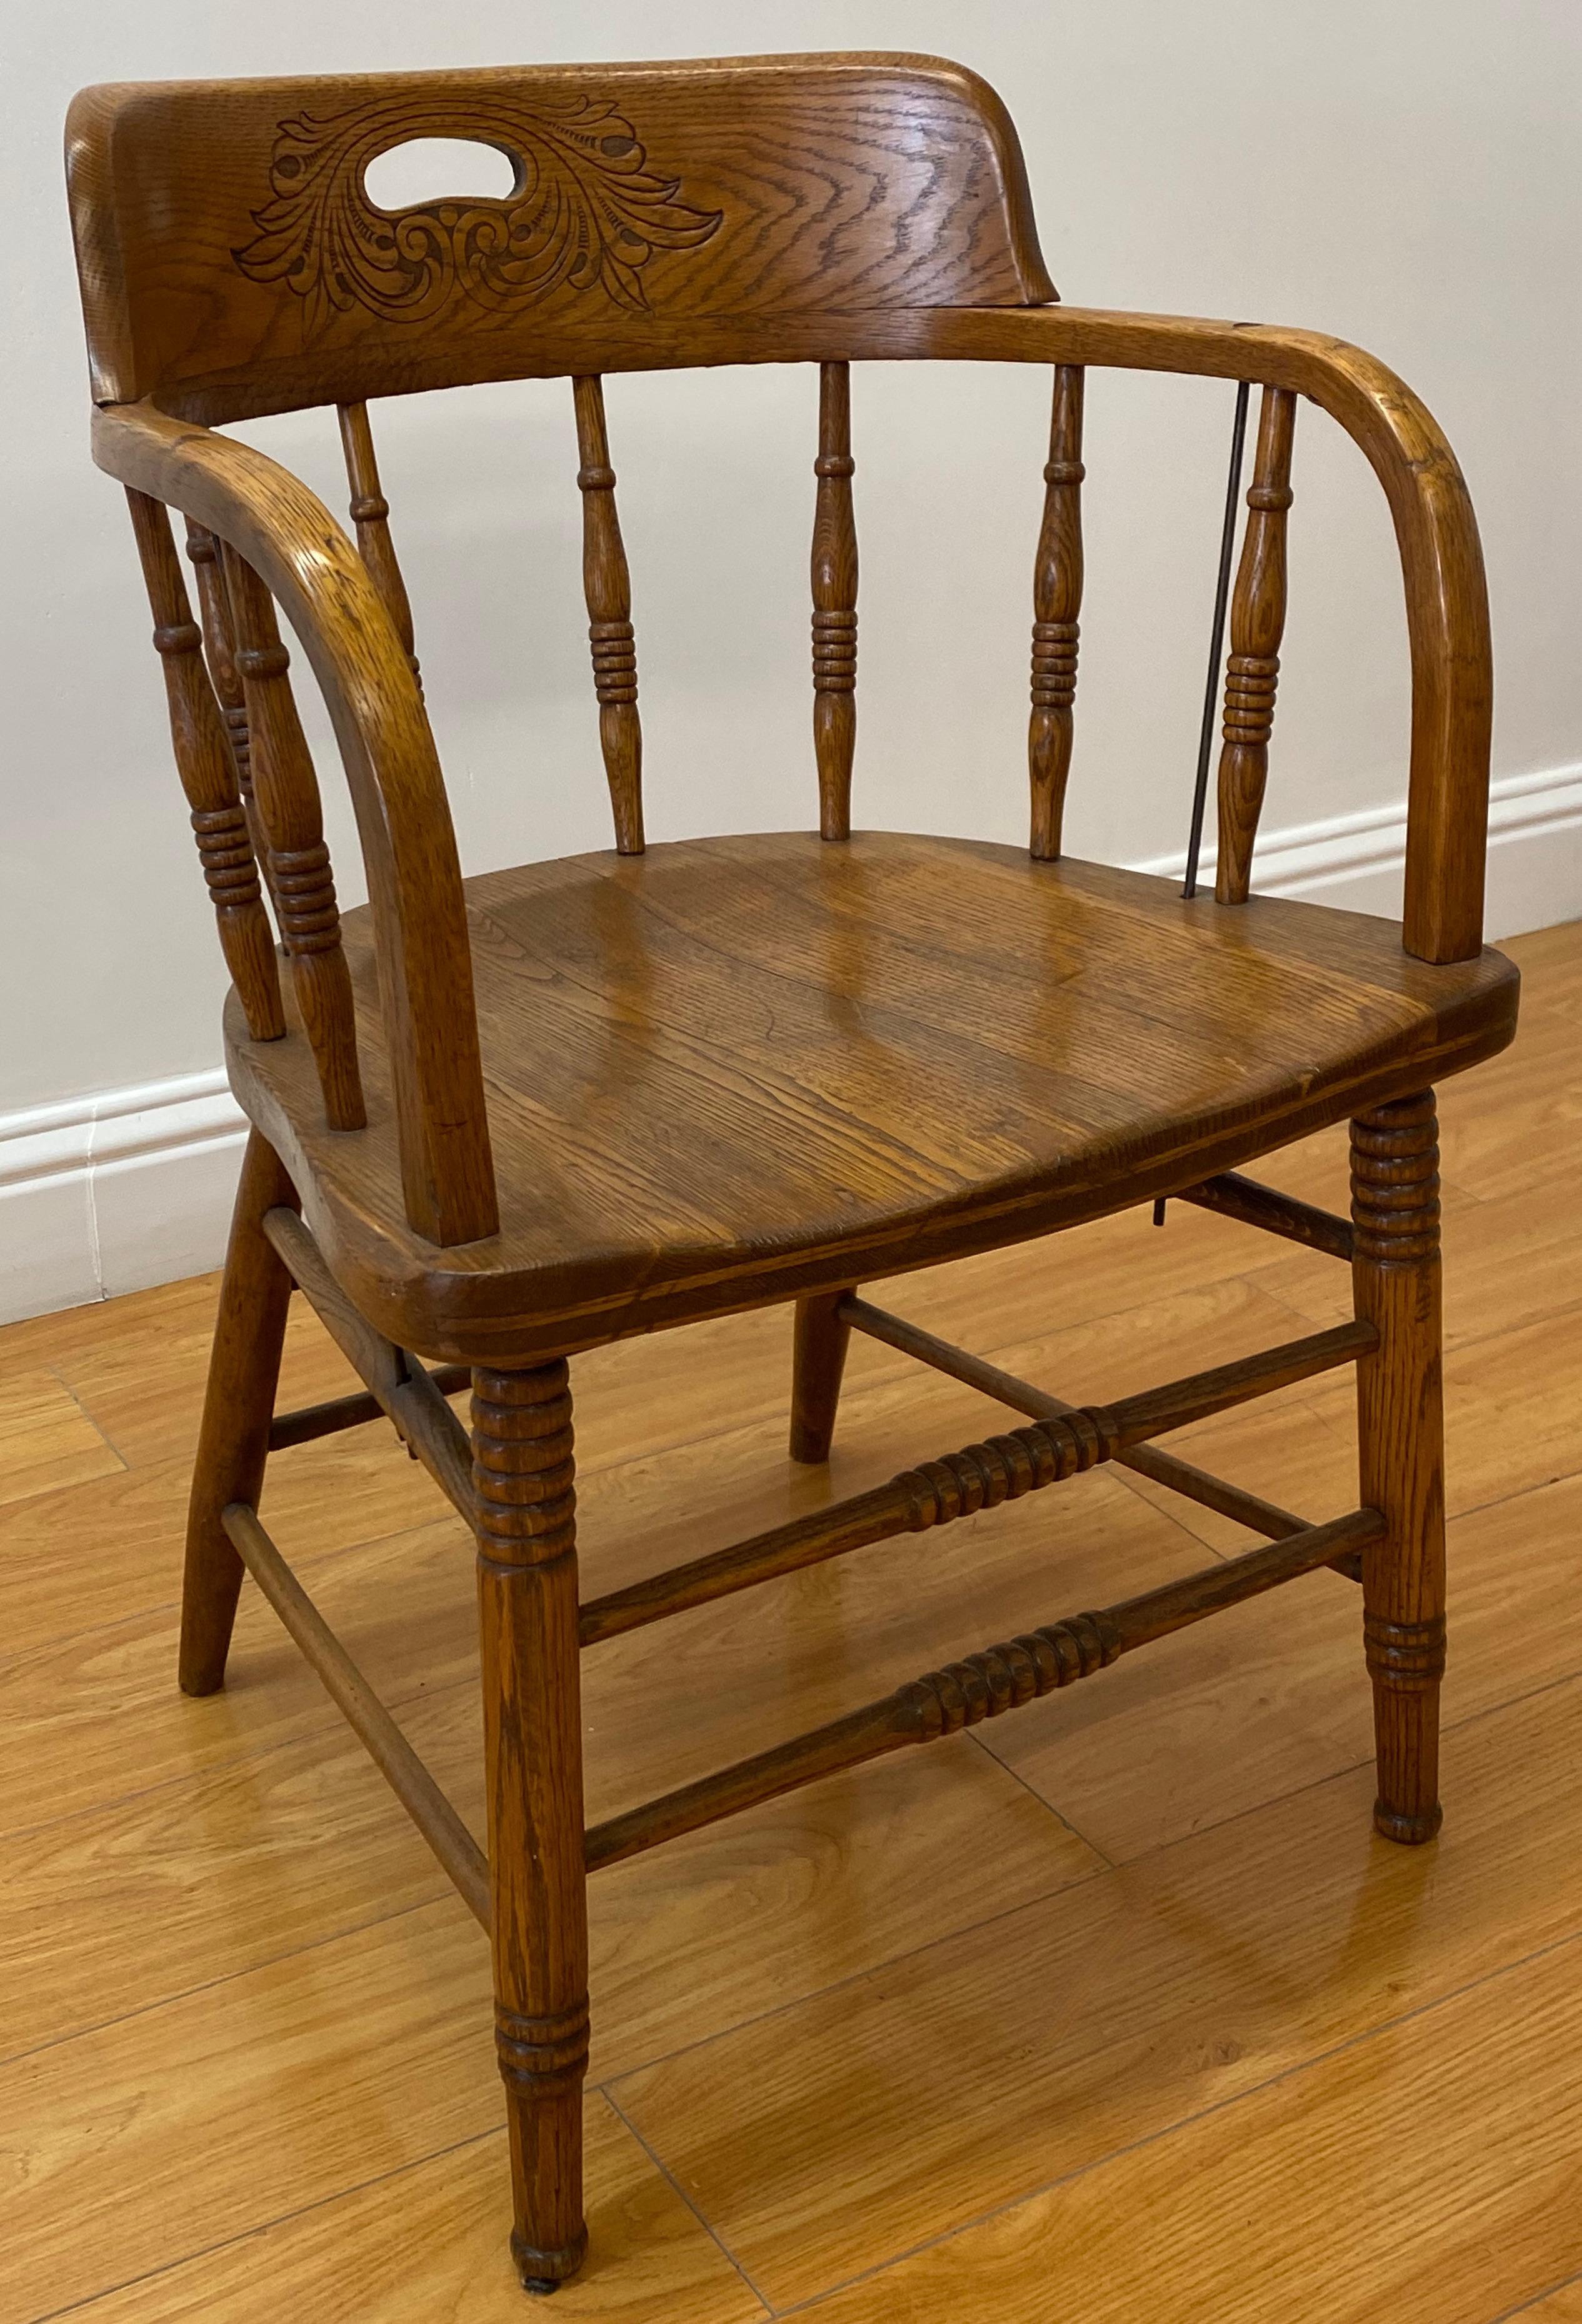 Set of four early 20th century mismatched barrel back oak pub chairs

American chairs in the style of Boling 

Each chair is slightly mismatched (see all images) but they work well together

Each chair is approximately 21